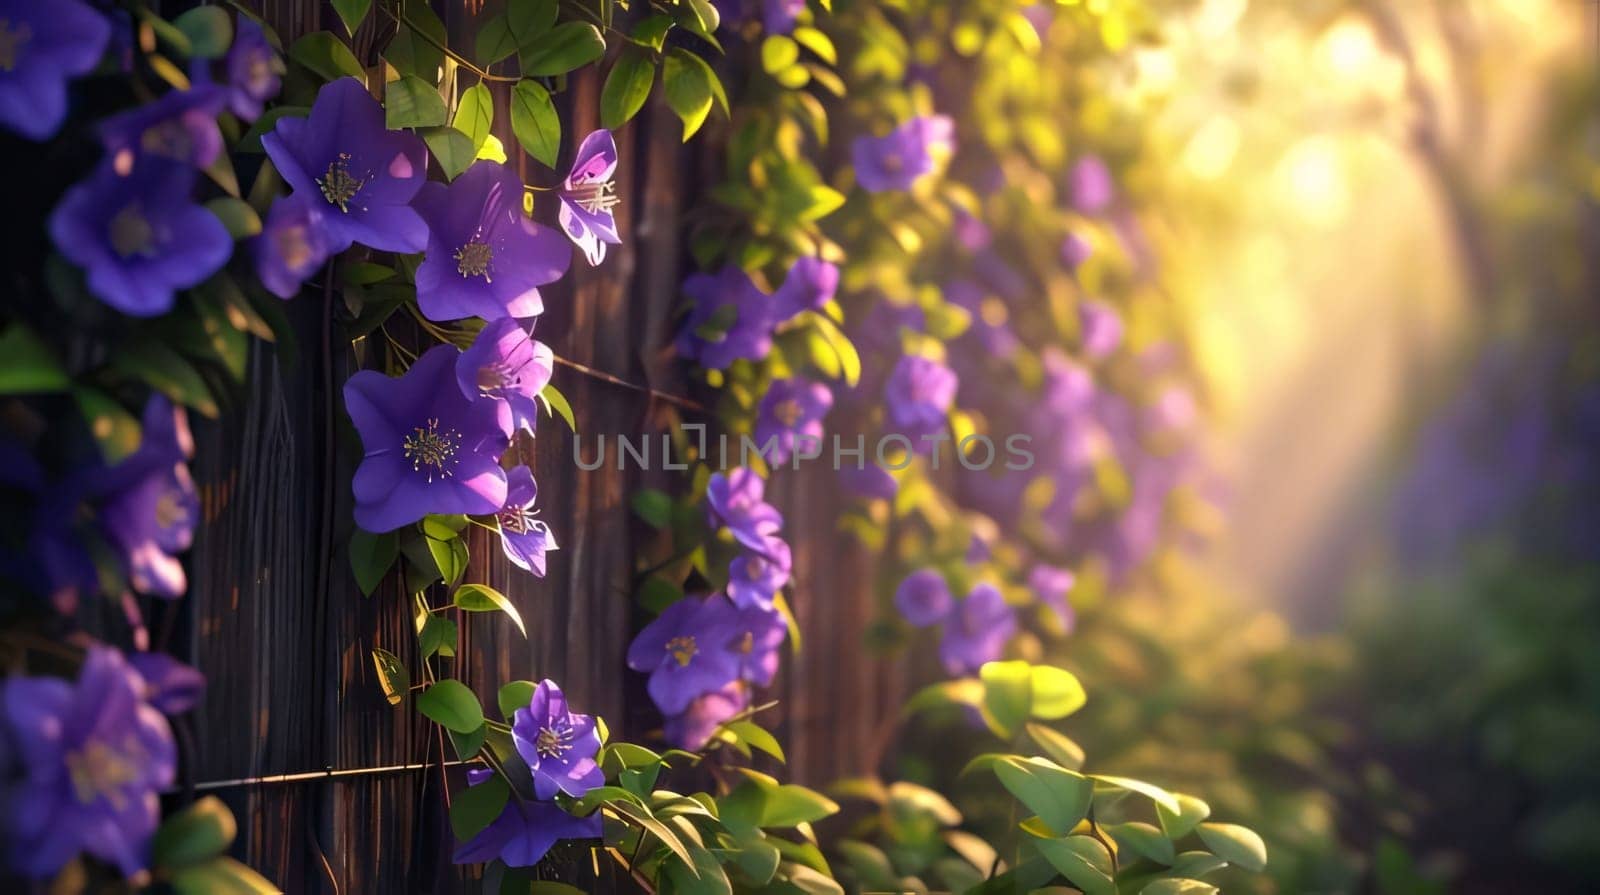 Blue flowers climbing on a wooden fence. rays of light, sunset in the background. Flowering flowers, a symbol of spring, new life. by ThemesS